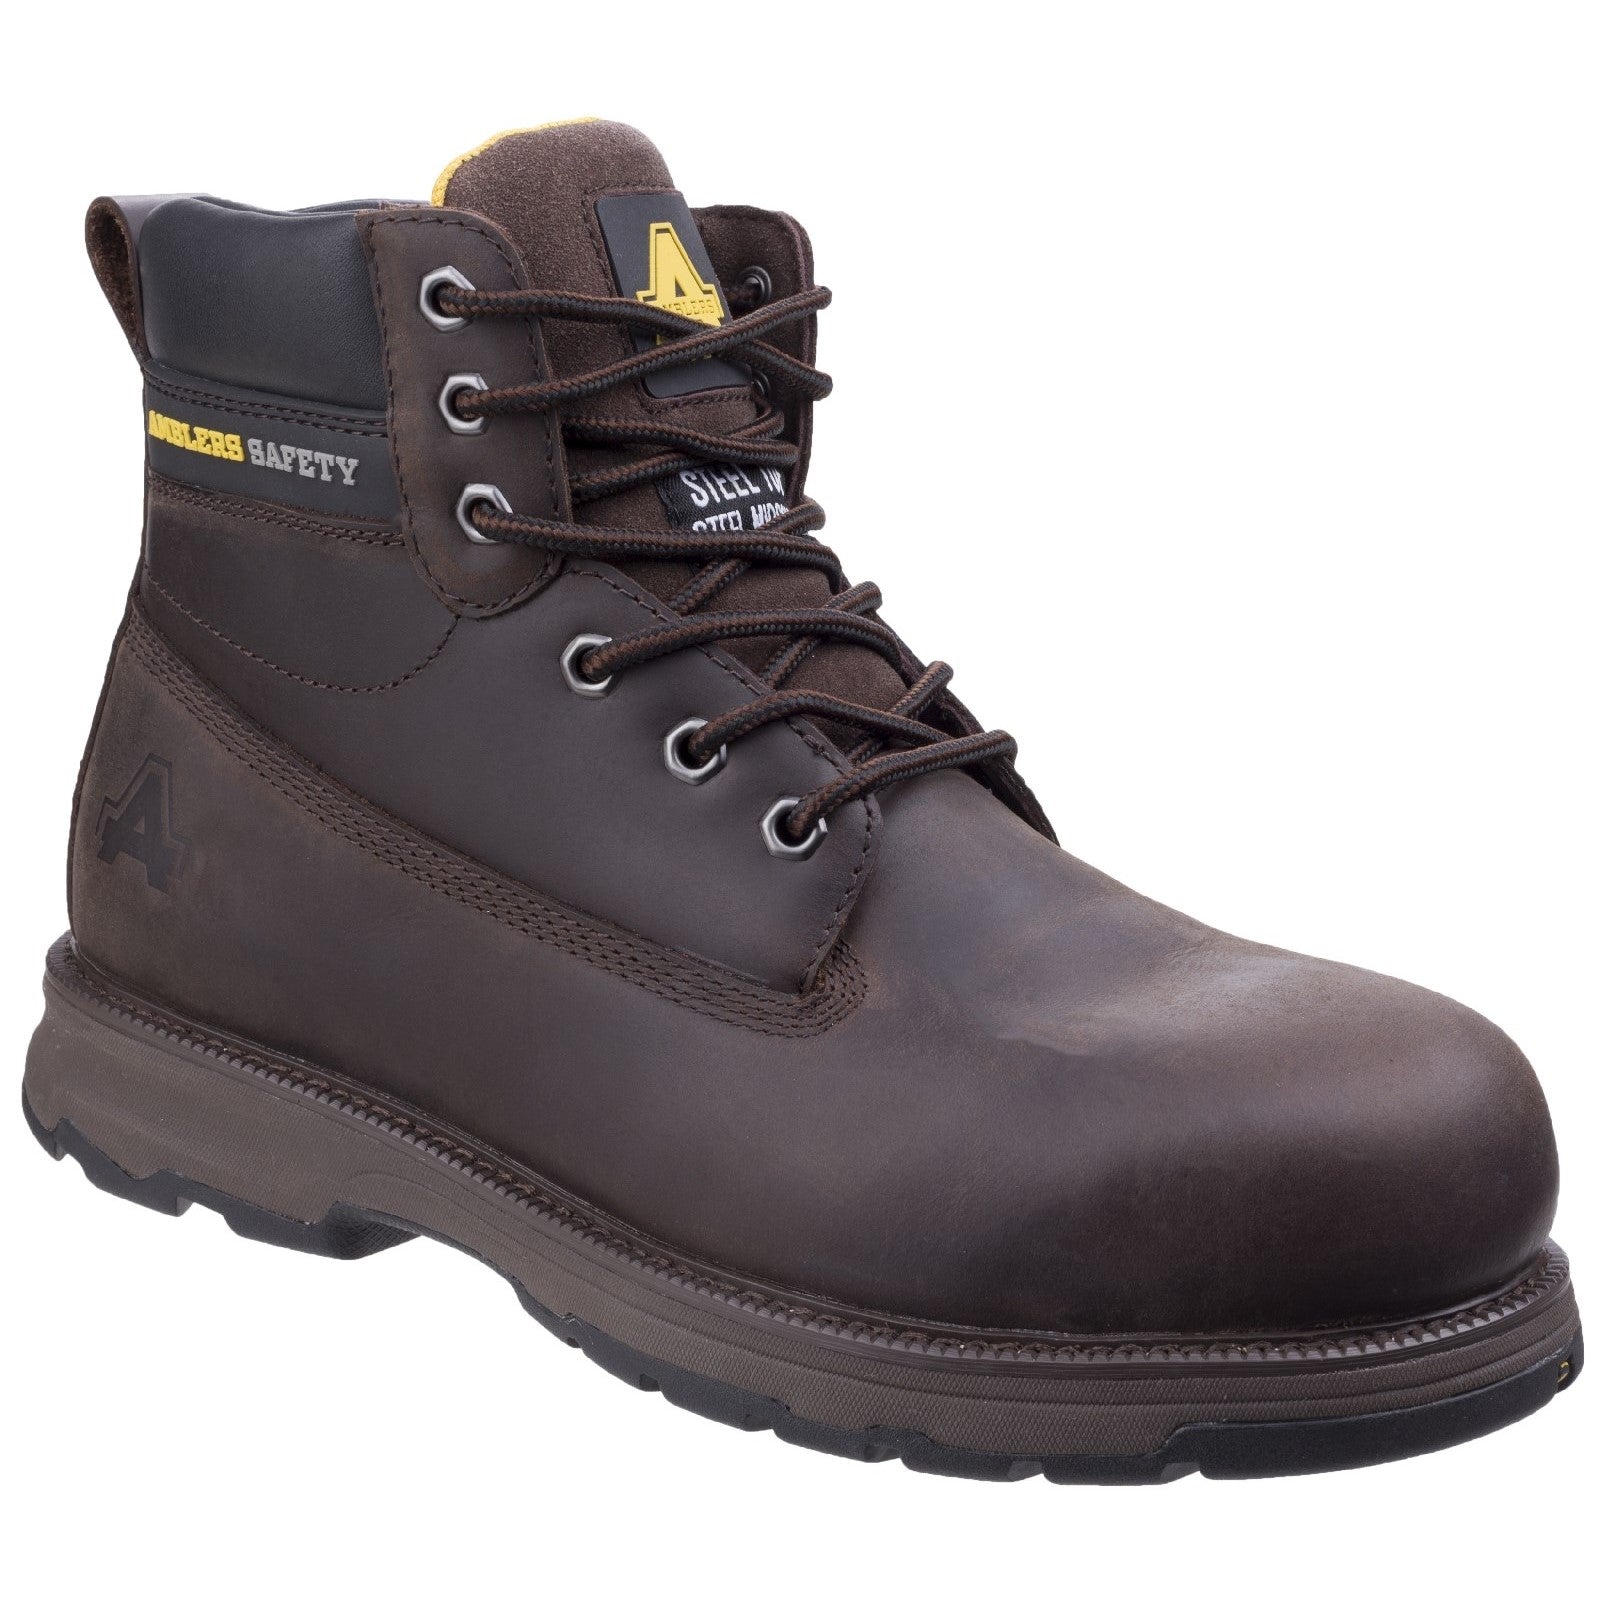 Amblers AS170 Lightweight Full Grain Leather Safety Boot